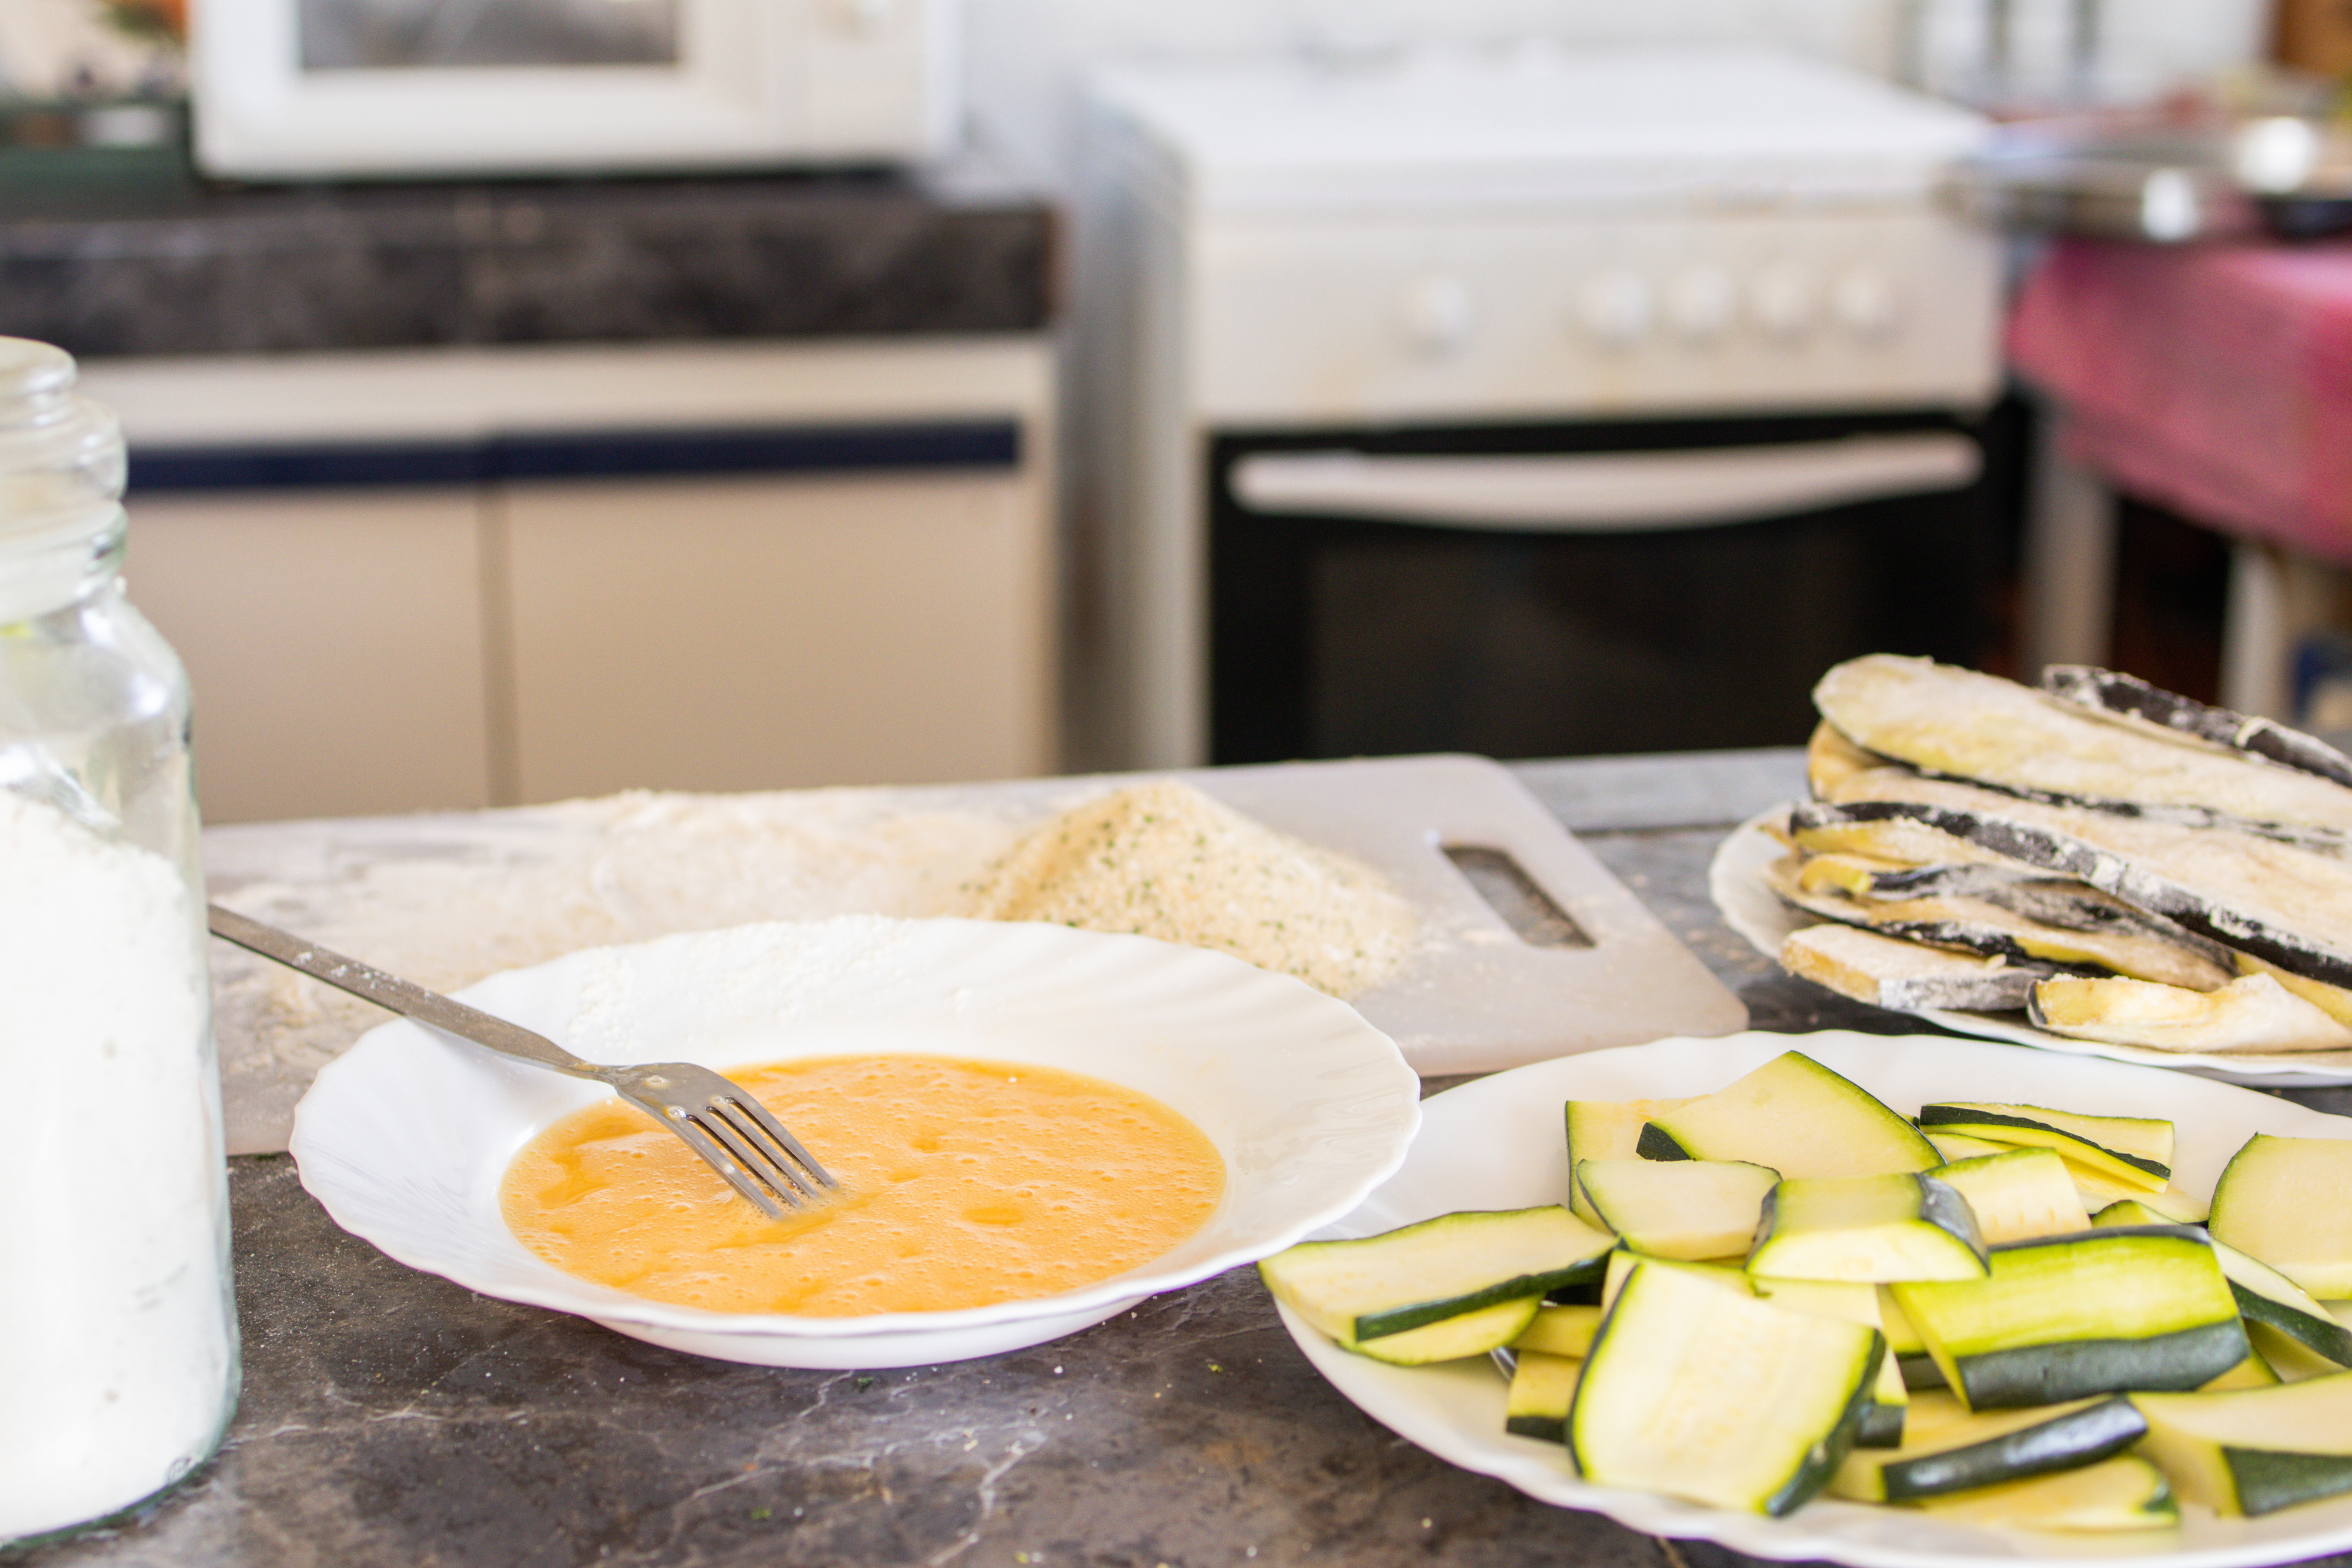 a shallow bowl of batter and a plate of zucchini slices